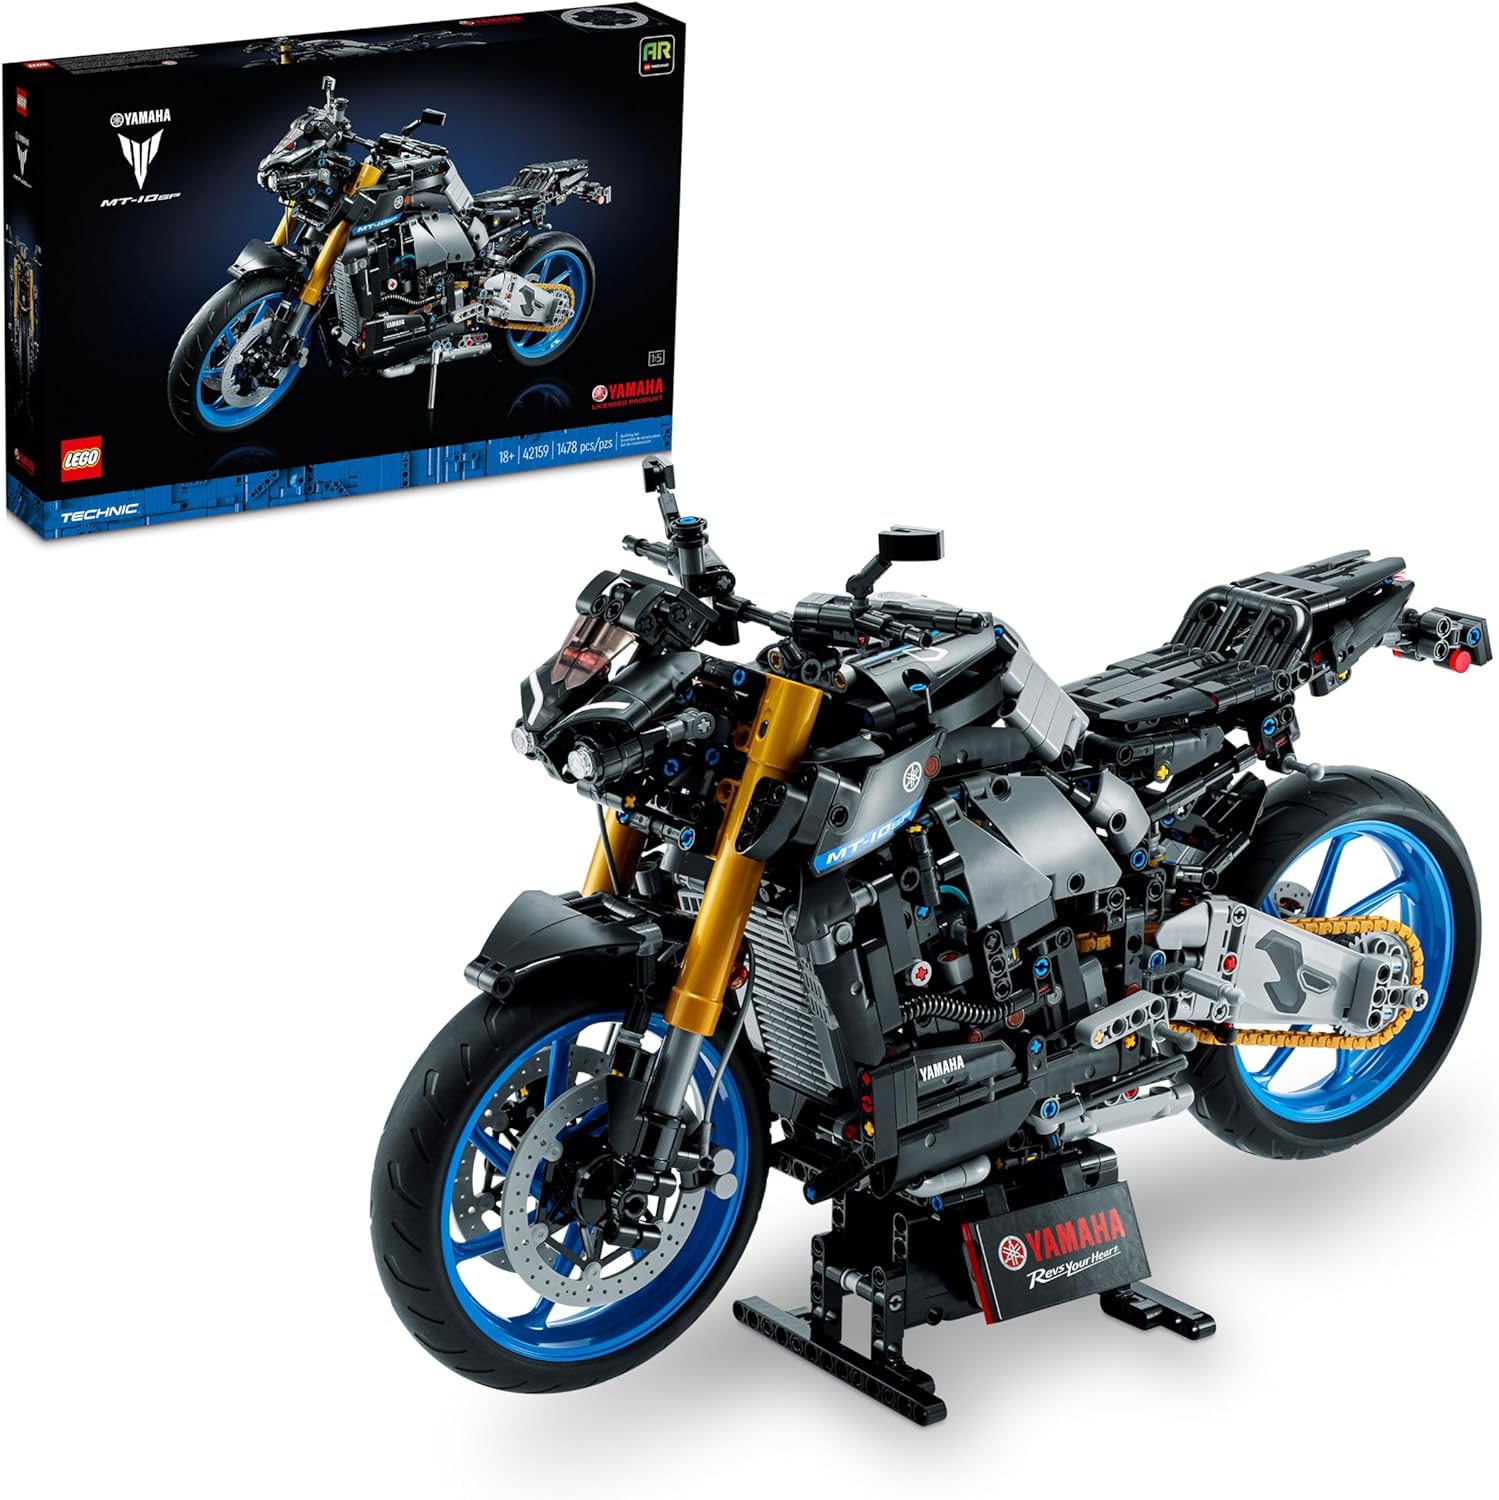 LEGO Technic Yamaha MT-10 SP 42159 Advanced Building Set for Adults - Iconic Motorcycle Model for Build and Display, Perfect Gift for Fans of Yamaha Vehicles and Motorcycle Collectibles